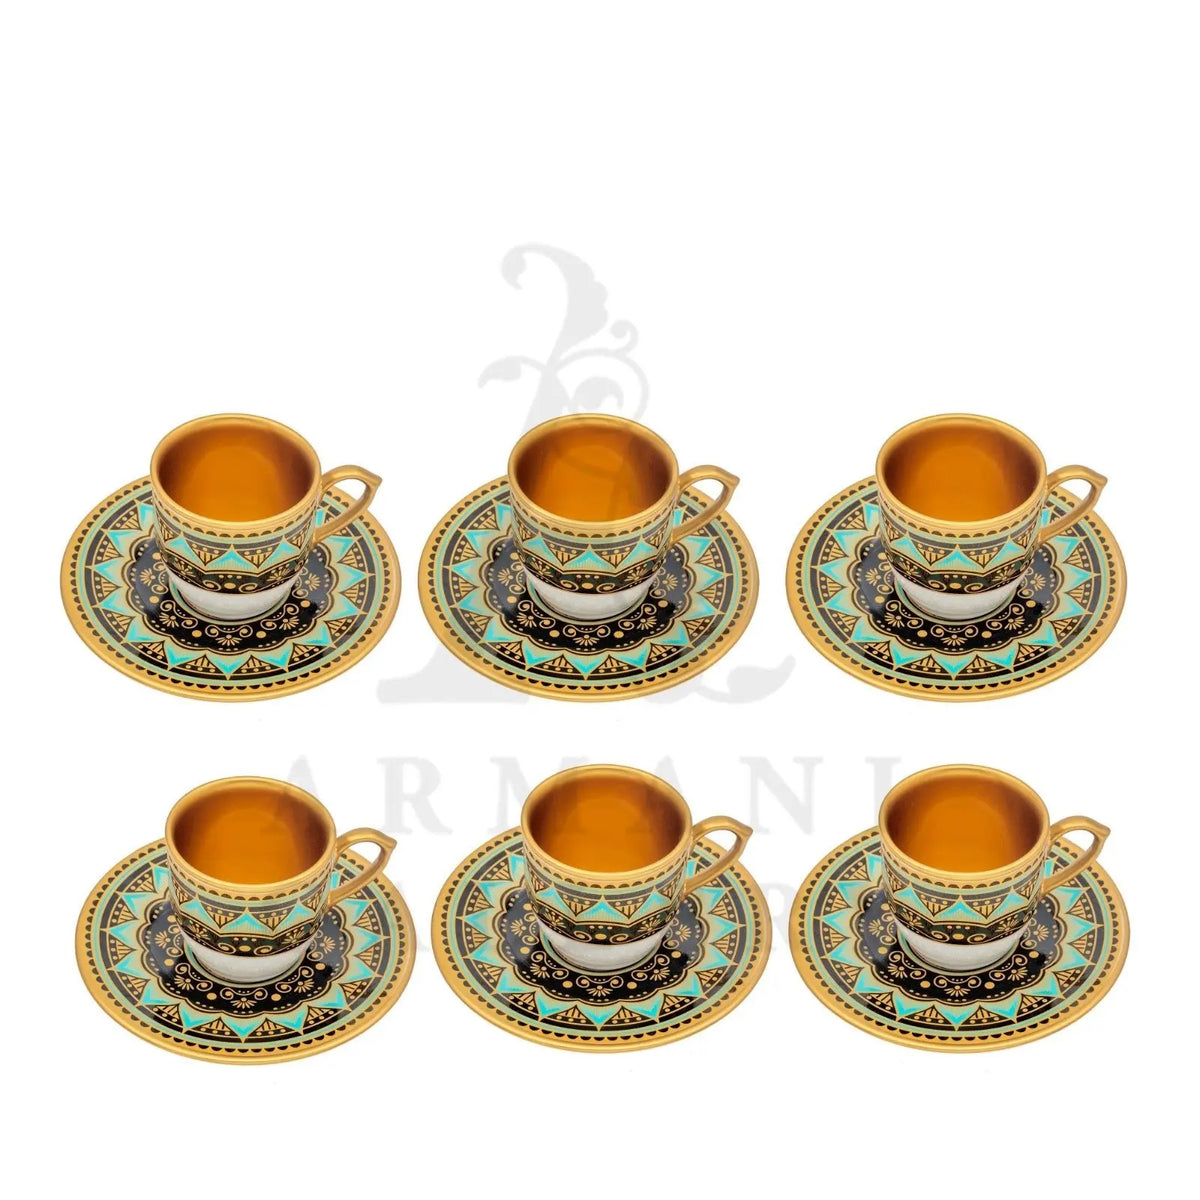 Turkish Coffee Cup Set Decorative Black and Turquoise 6pcs - Armani Gallery